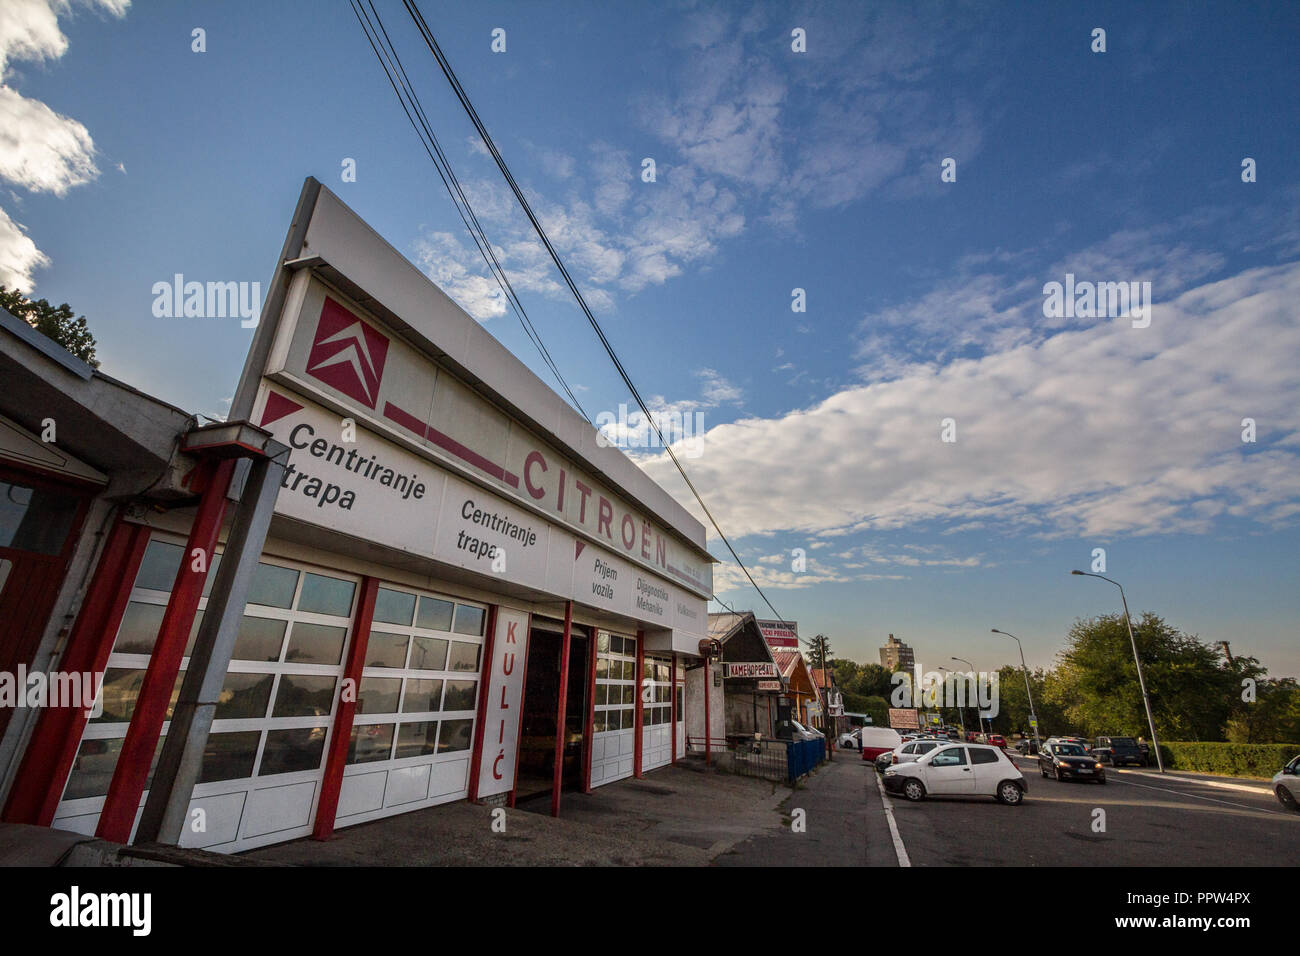 PANCEVO, SERBIA - SEPTEMBER 27, 2018: Citroen logo on an sign of a car dealership and garage of the brand. Citroen, part of PSA group, is one of main  Stock Photo